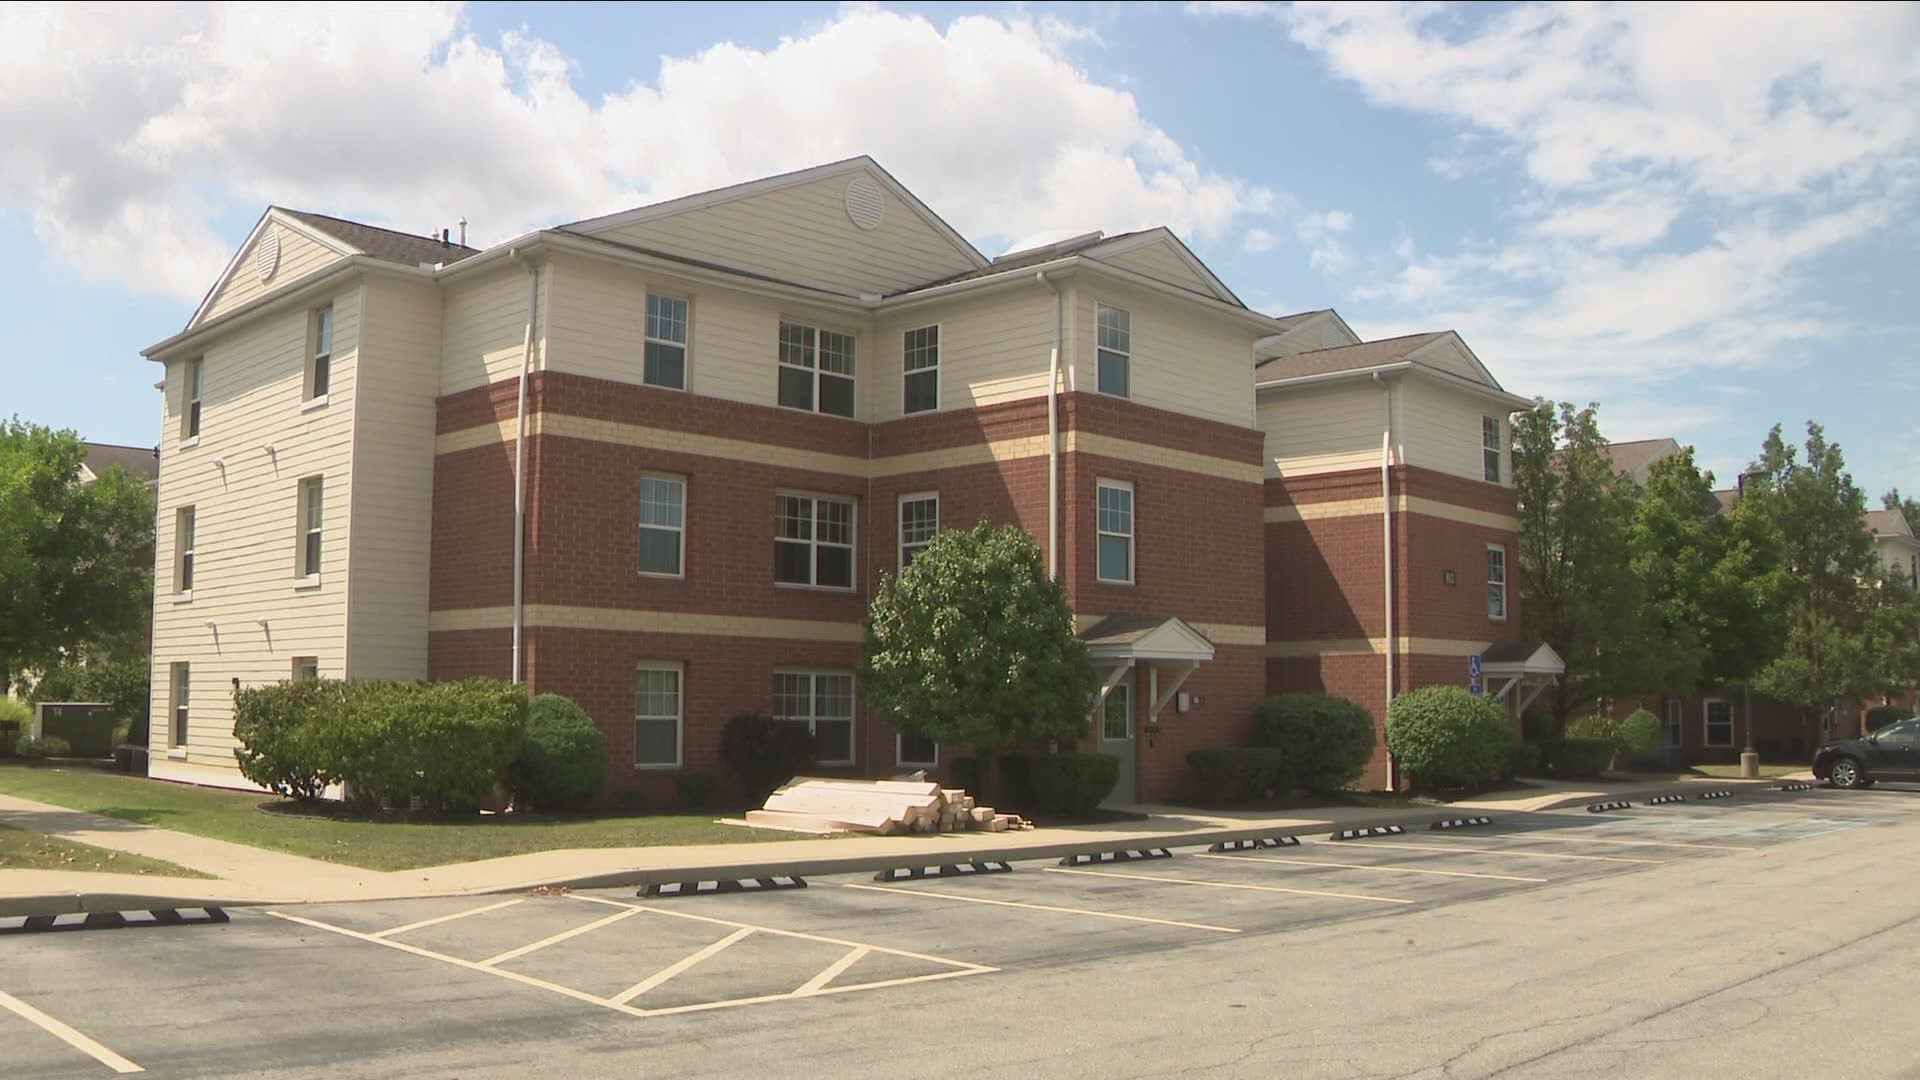 Students living on campus will only be housed at UB North, on campus residence halls at UB South have been closed